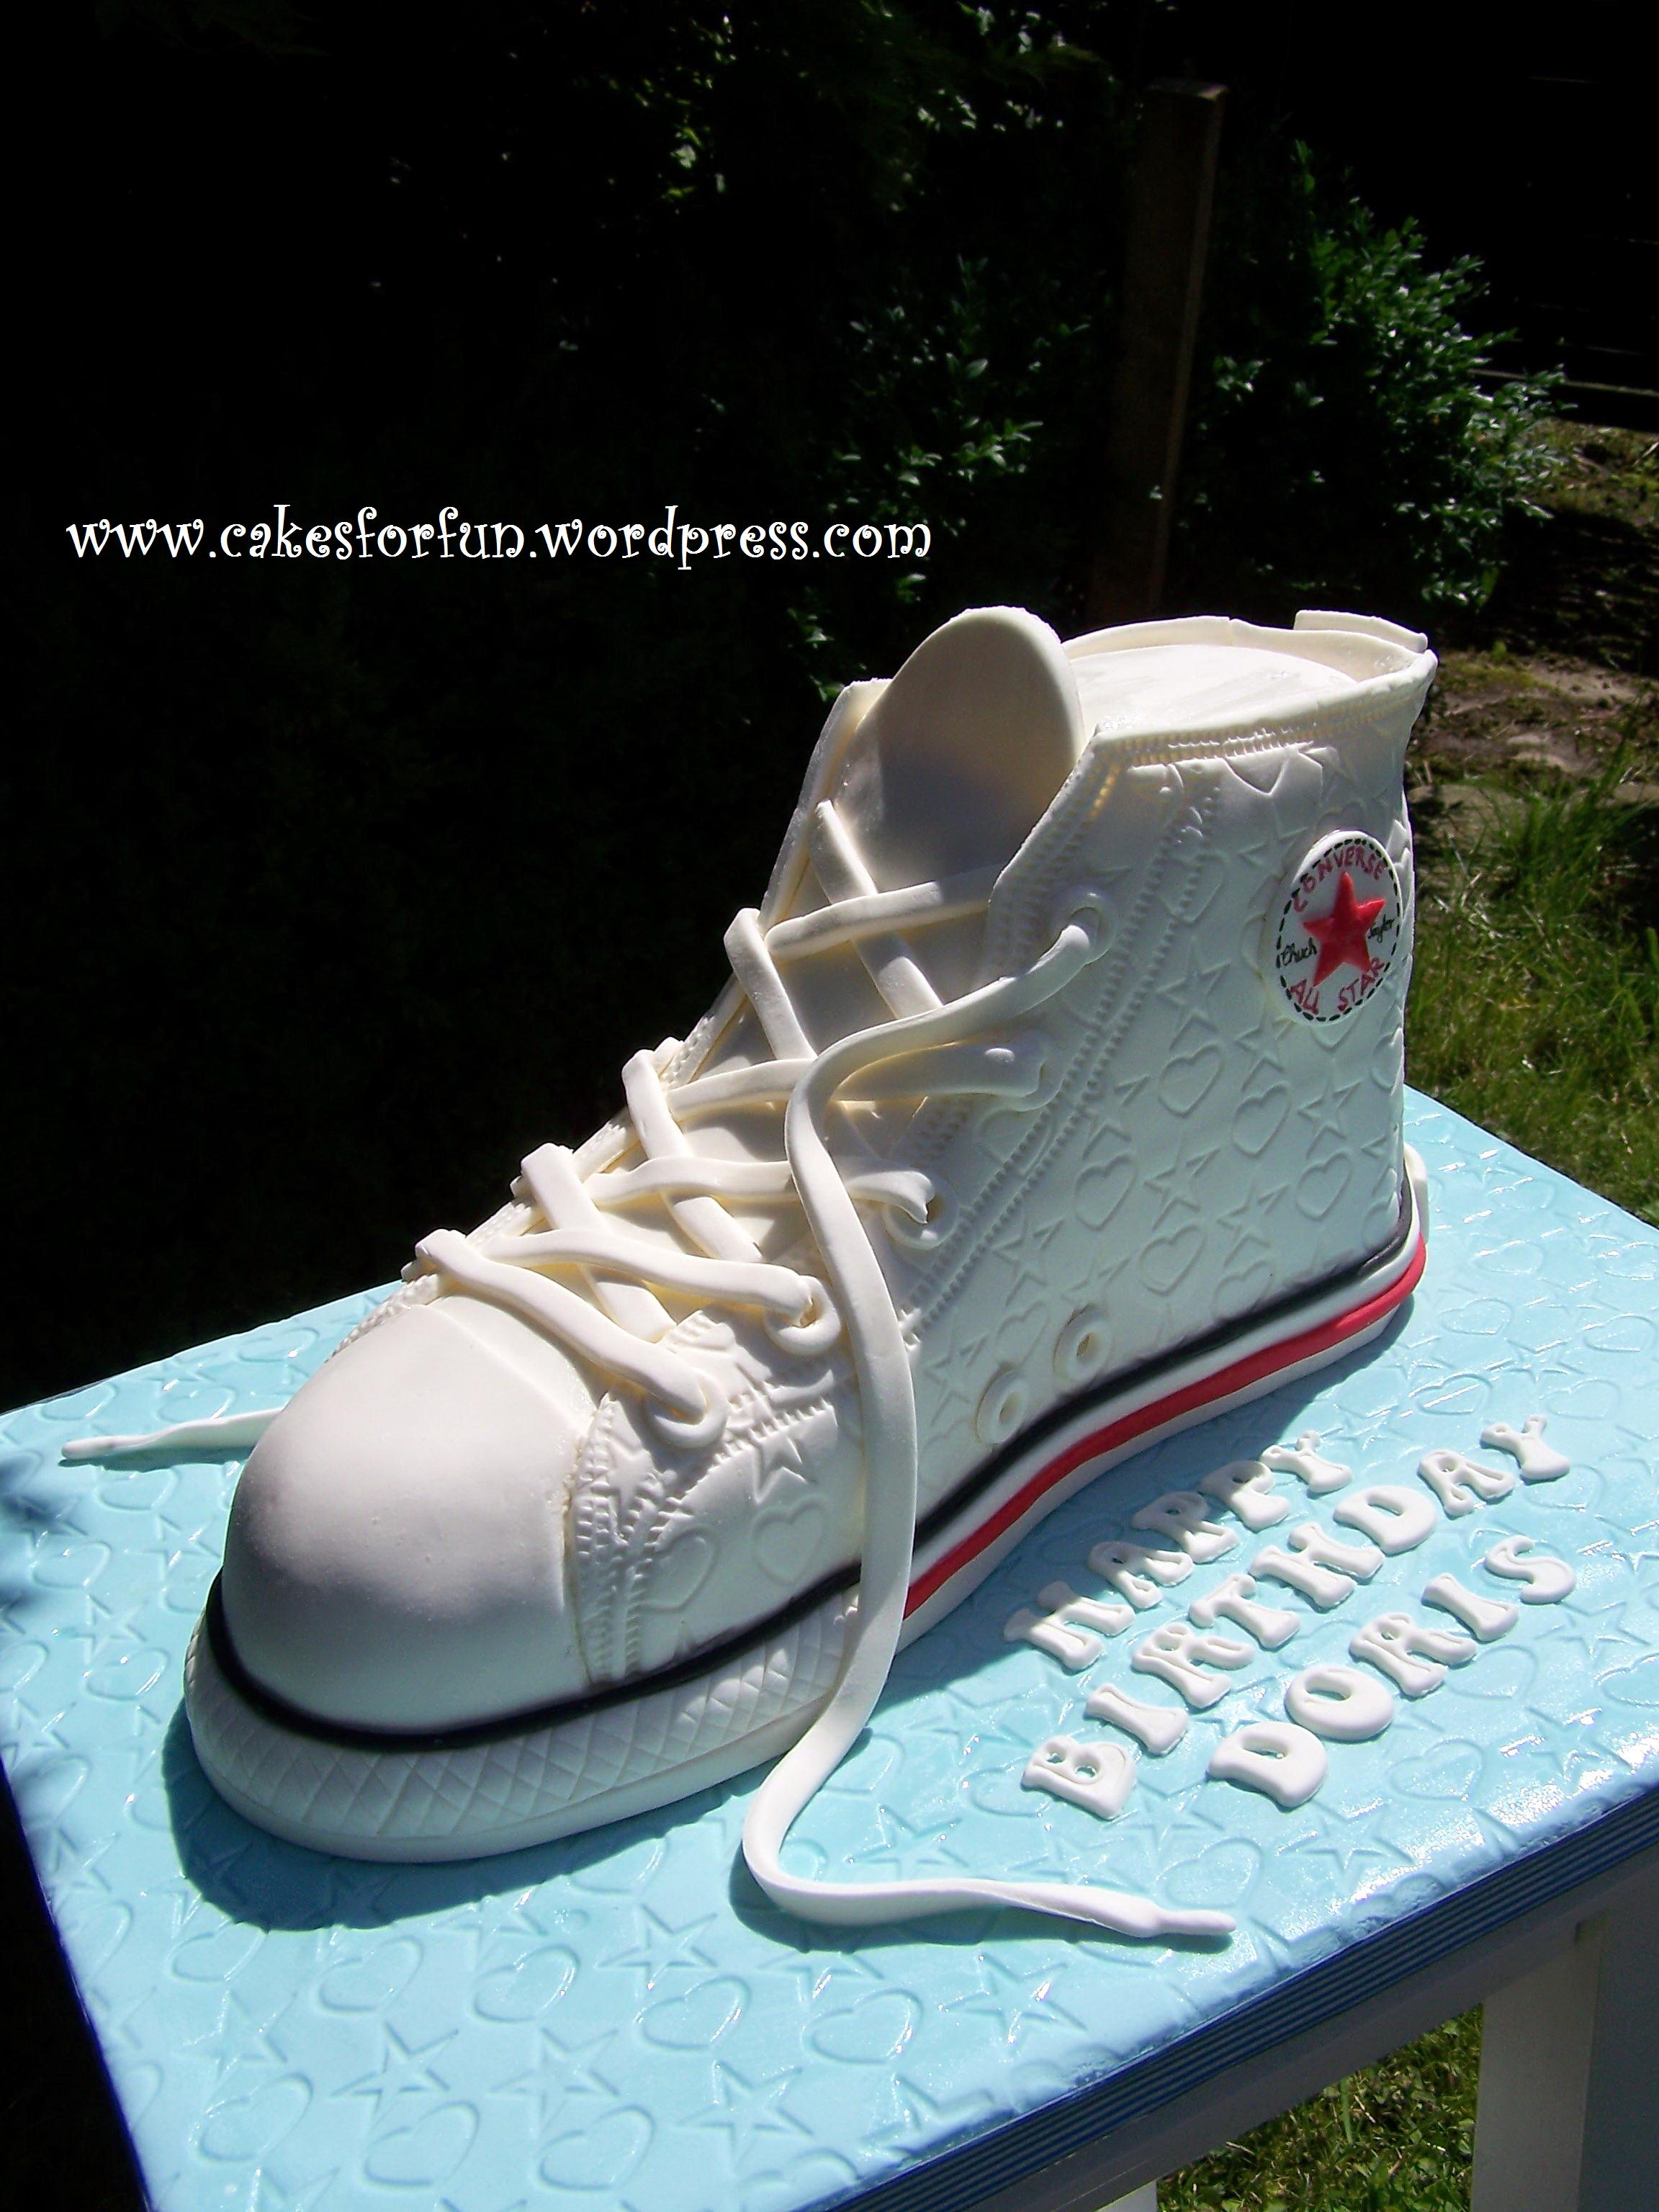 converse wedding cake toppers